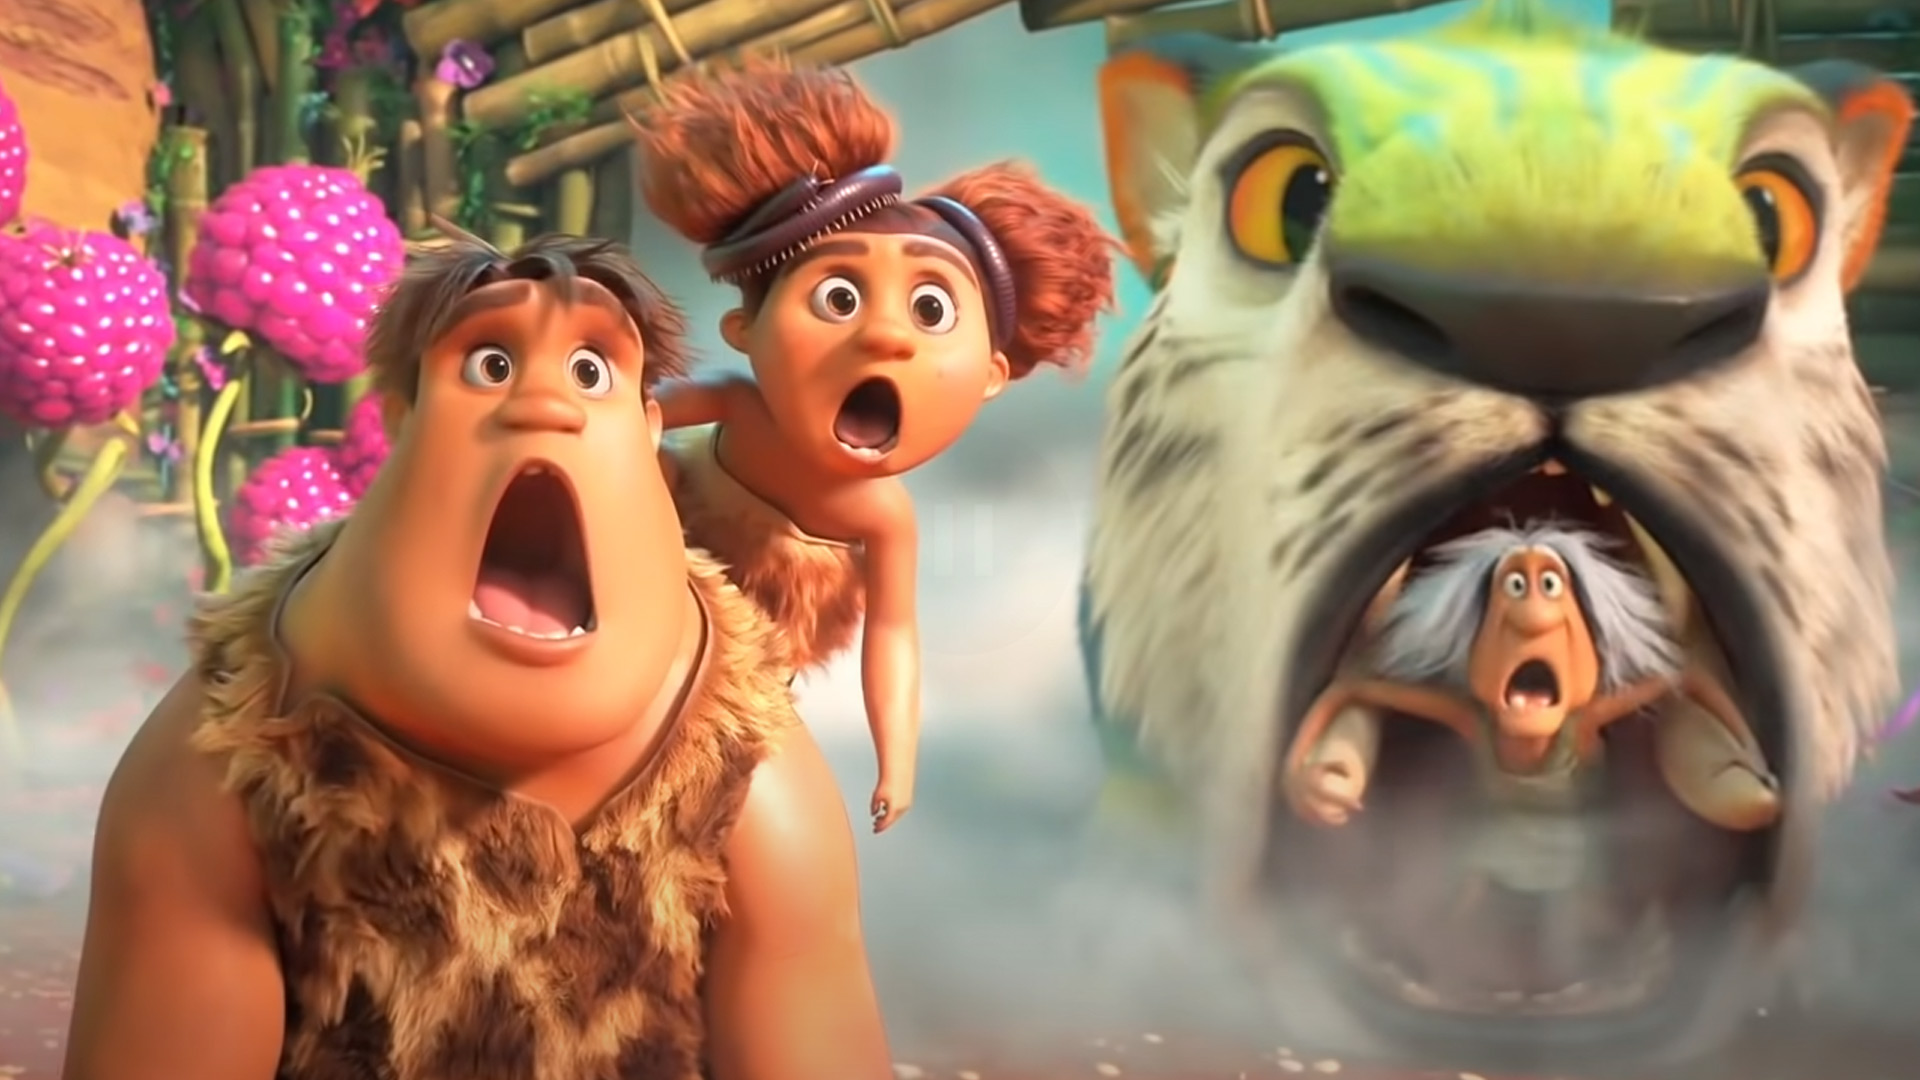 THE-CROODS-2-Trailer-(2020)-A-NEW-AGE